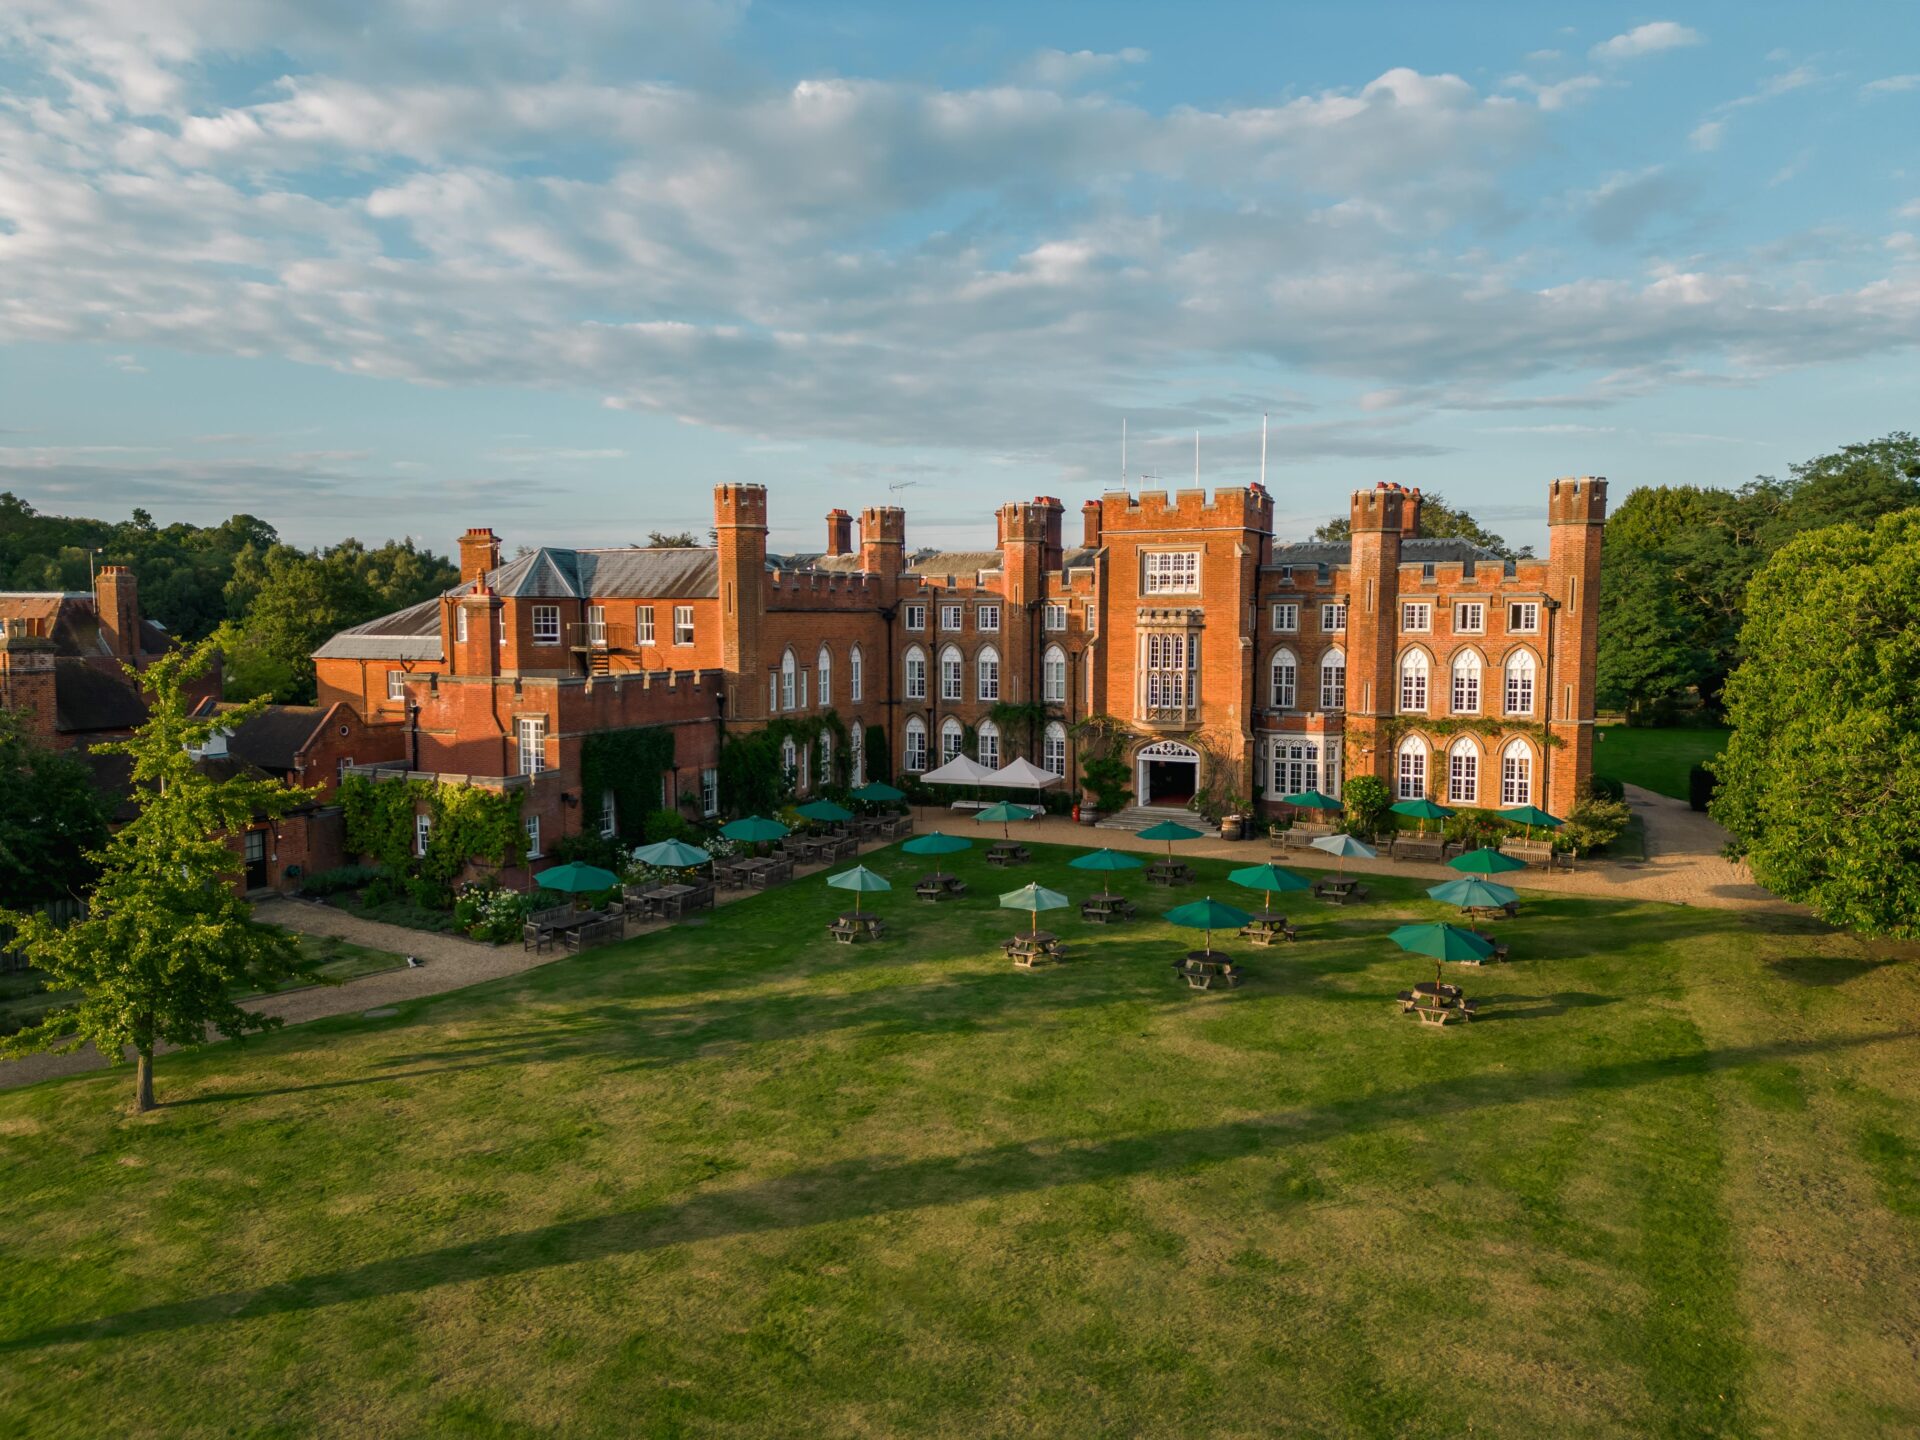 A drone shot of Cumberland Lodge taken from the back lawn